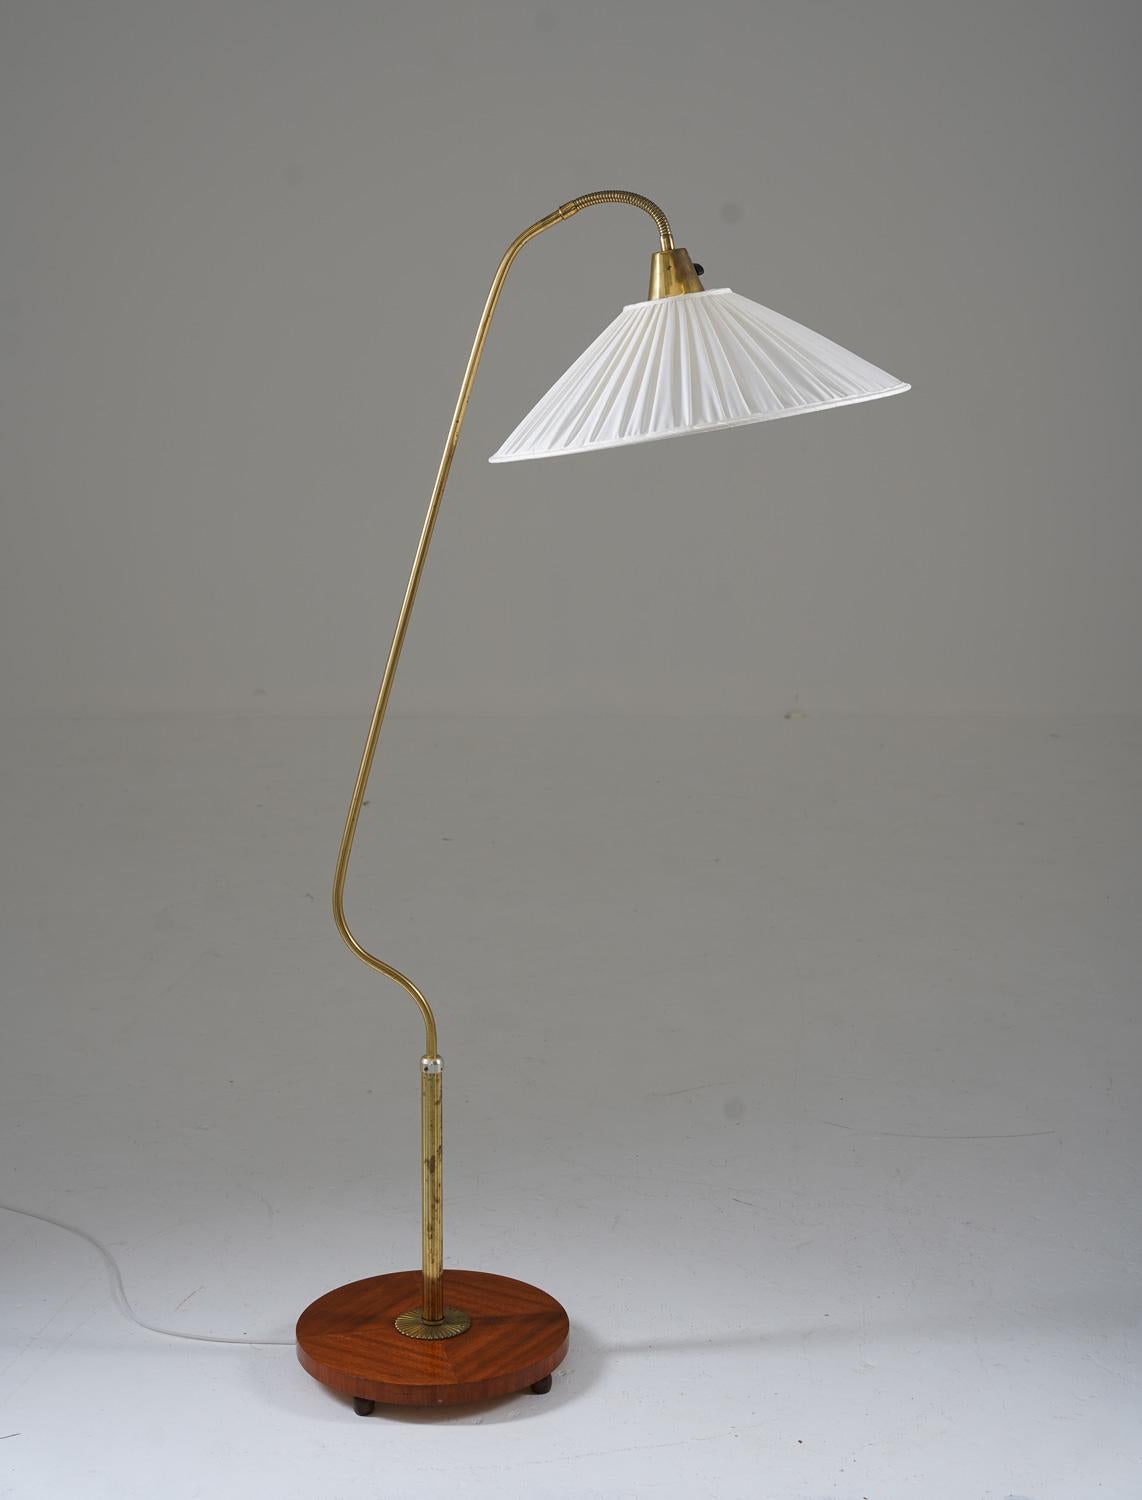 This is a lovely Swedish Modern floor lamp that was manufactured in Sweden during the 1940s. The lamp features a wooden base and a brass rod, which supports an adjustable fedder arm that hold the shade. 

Condition:
The lamp is in good vintage